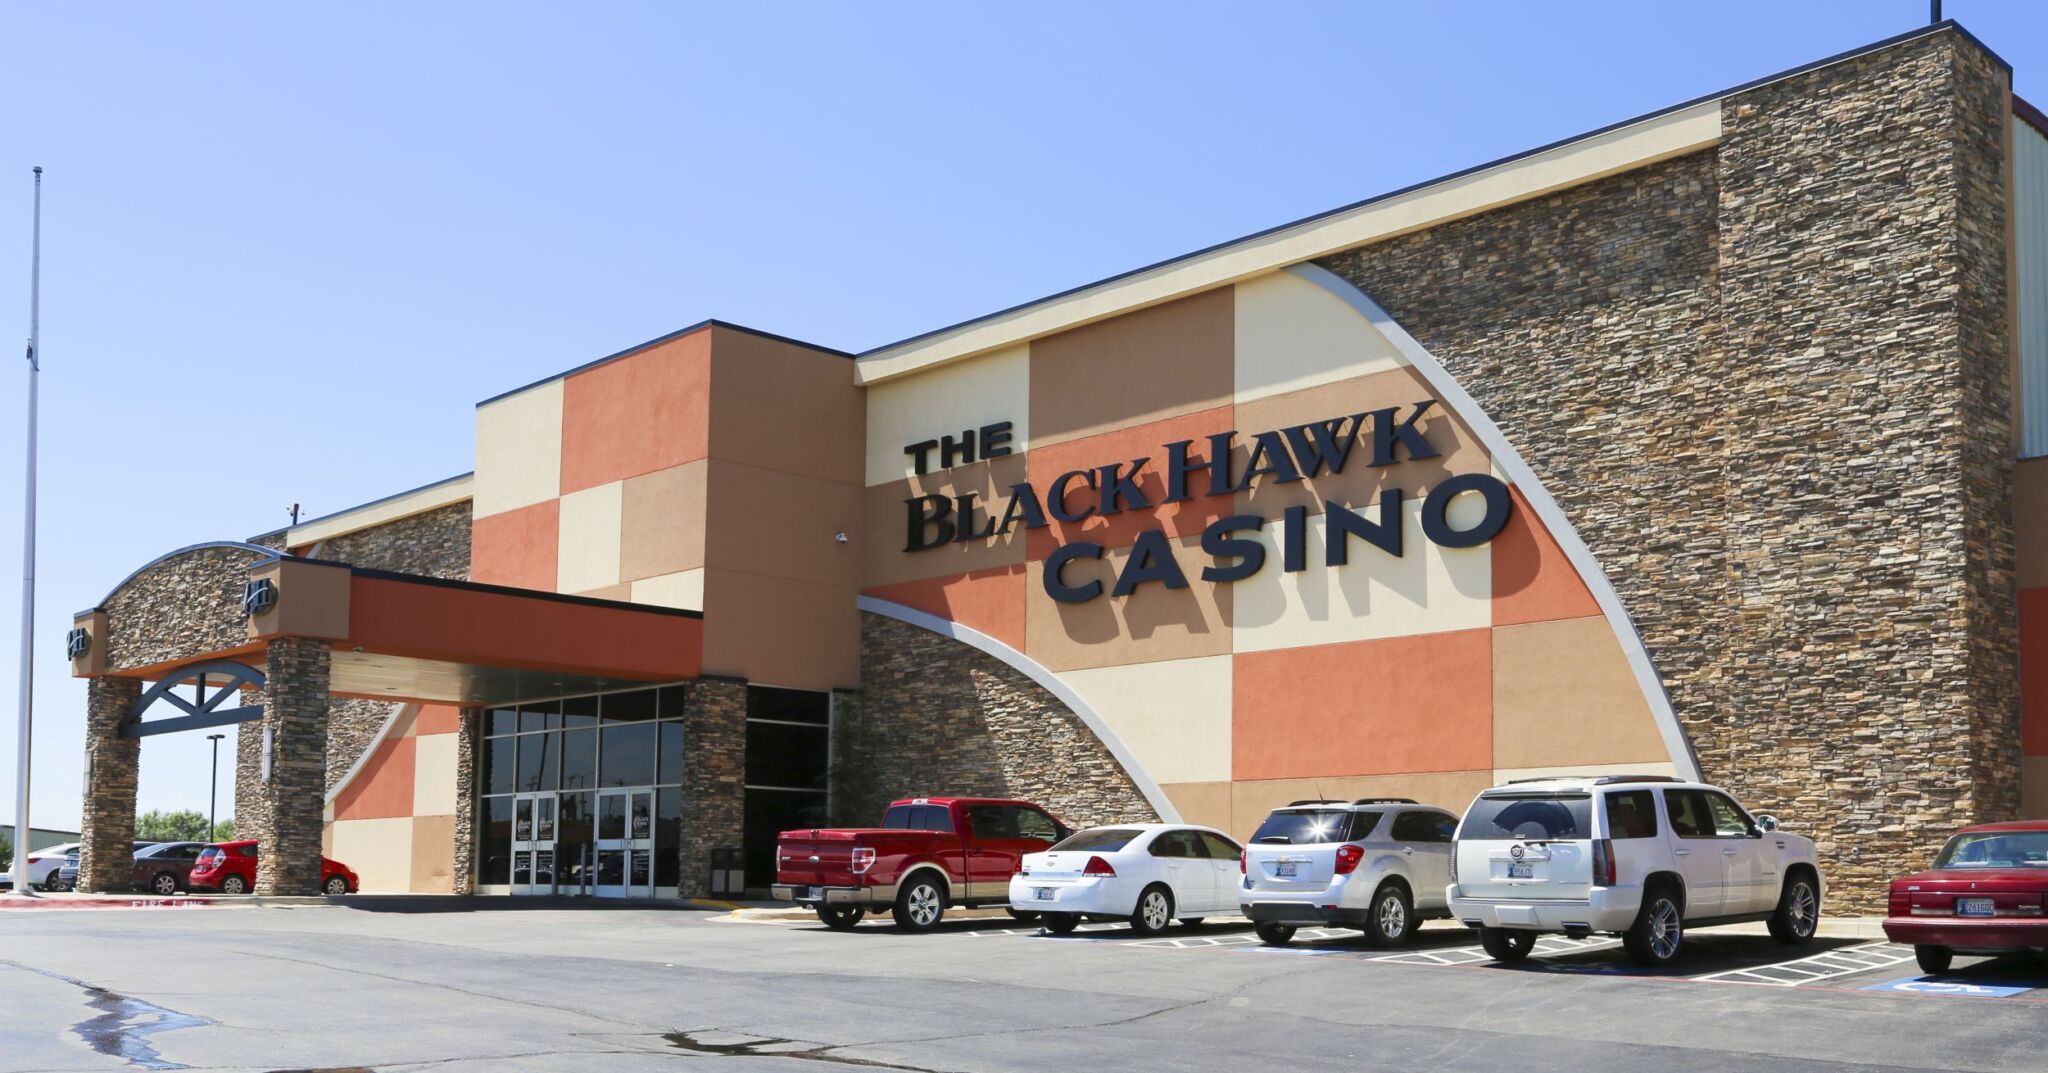 parks close to red hawk casino